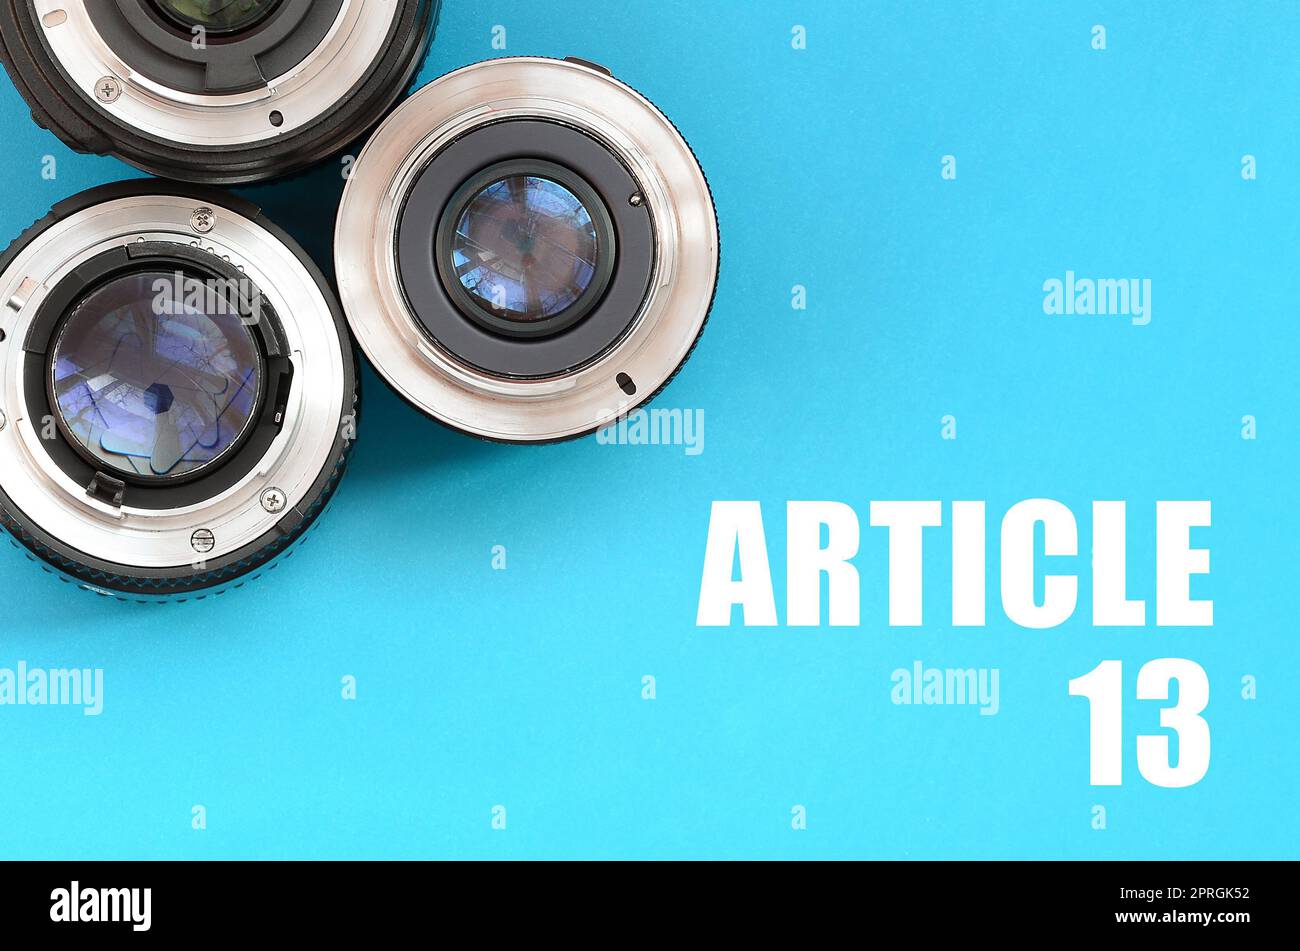 Several photographic lenses and article 13 inscription on blue background. European copyright directive including article 13 is approved by european p Stock Photo